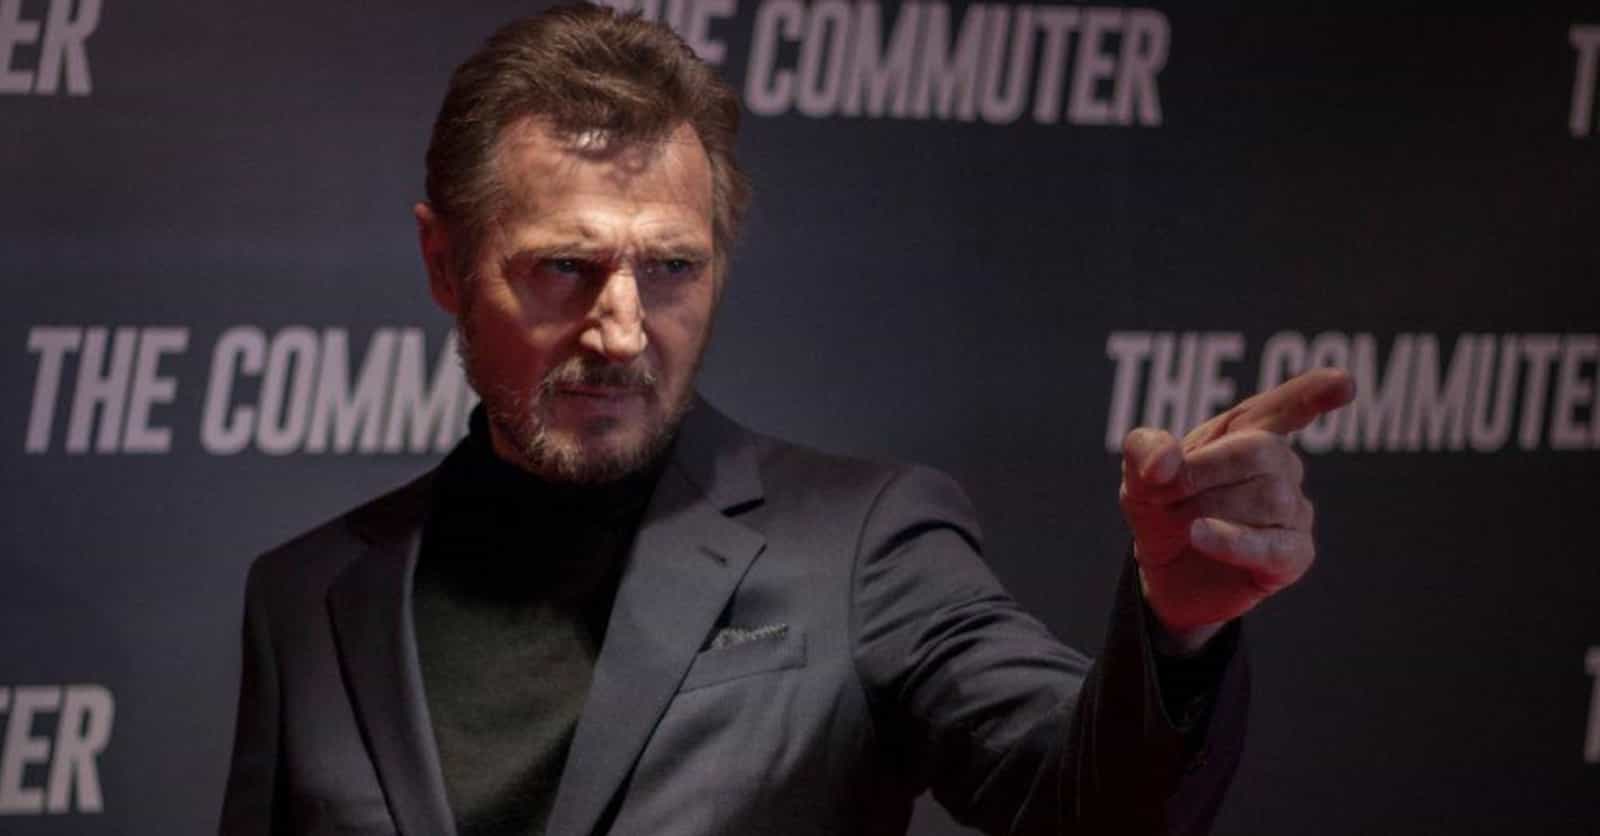 15 Facts About Liam Neeson That Prove He's Just As Intense As The Characters He Plays